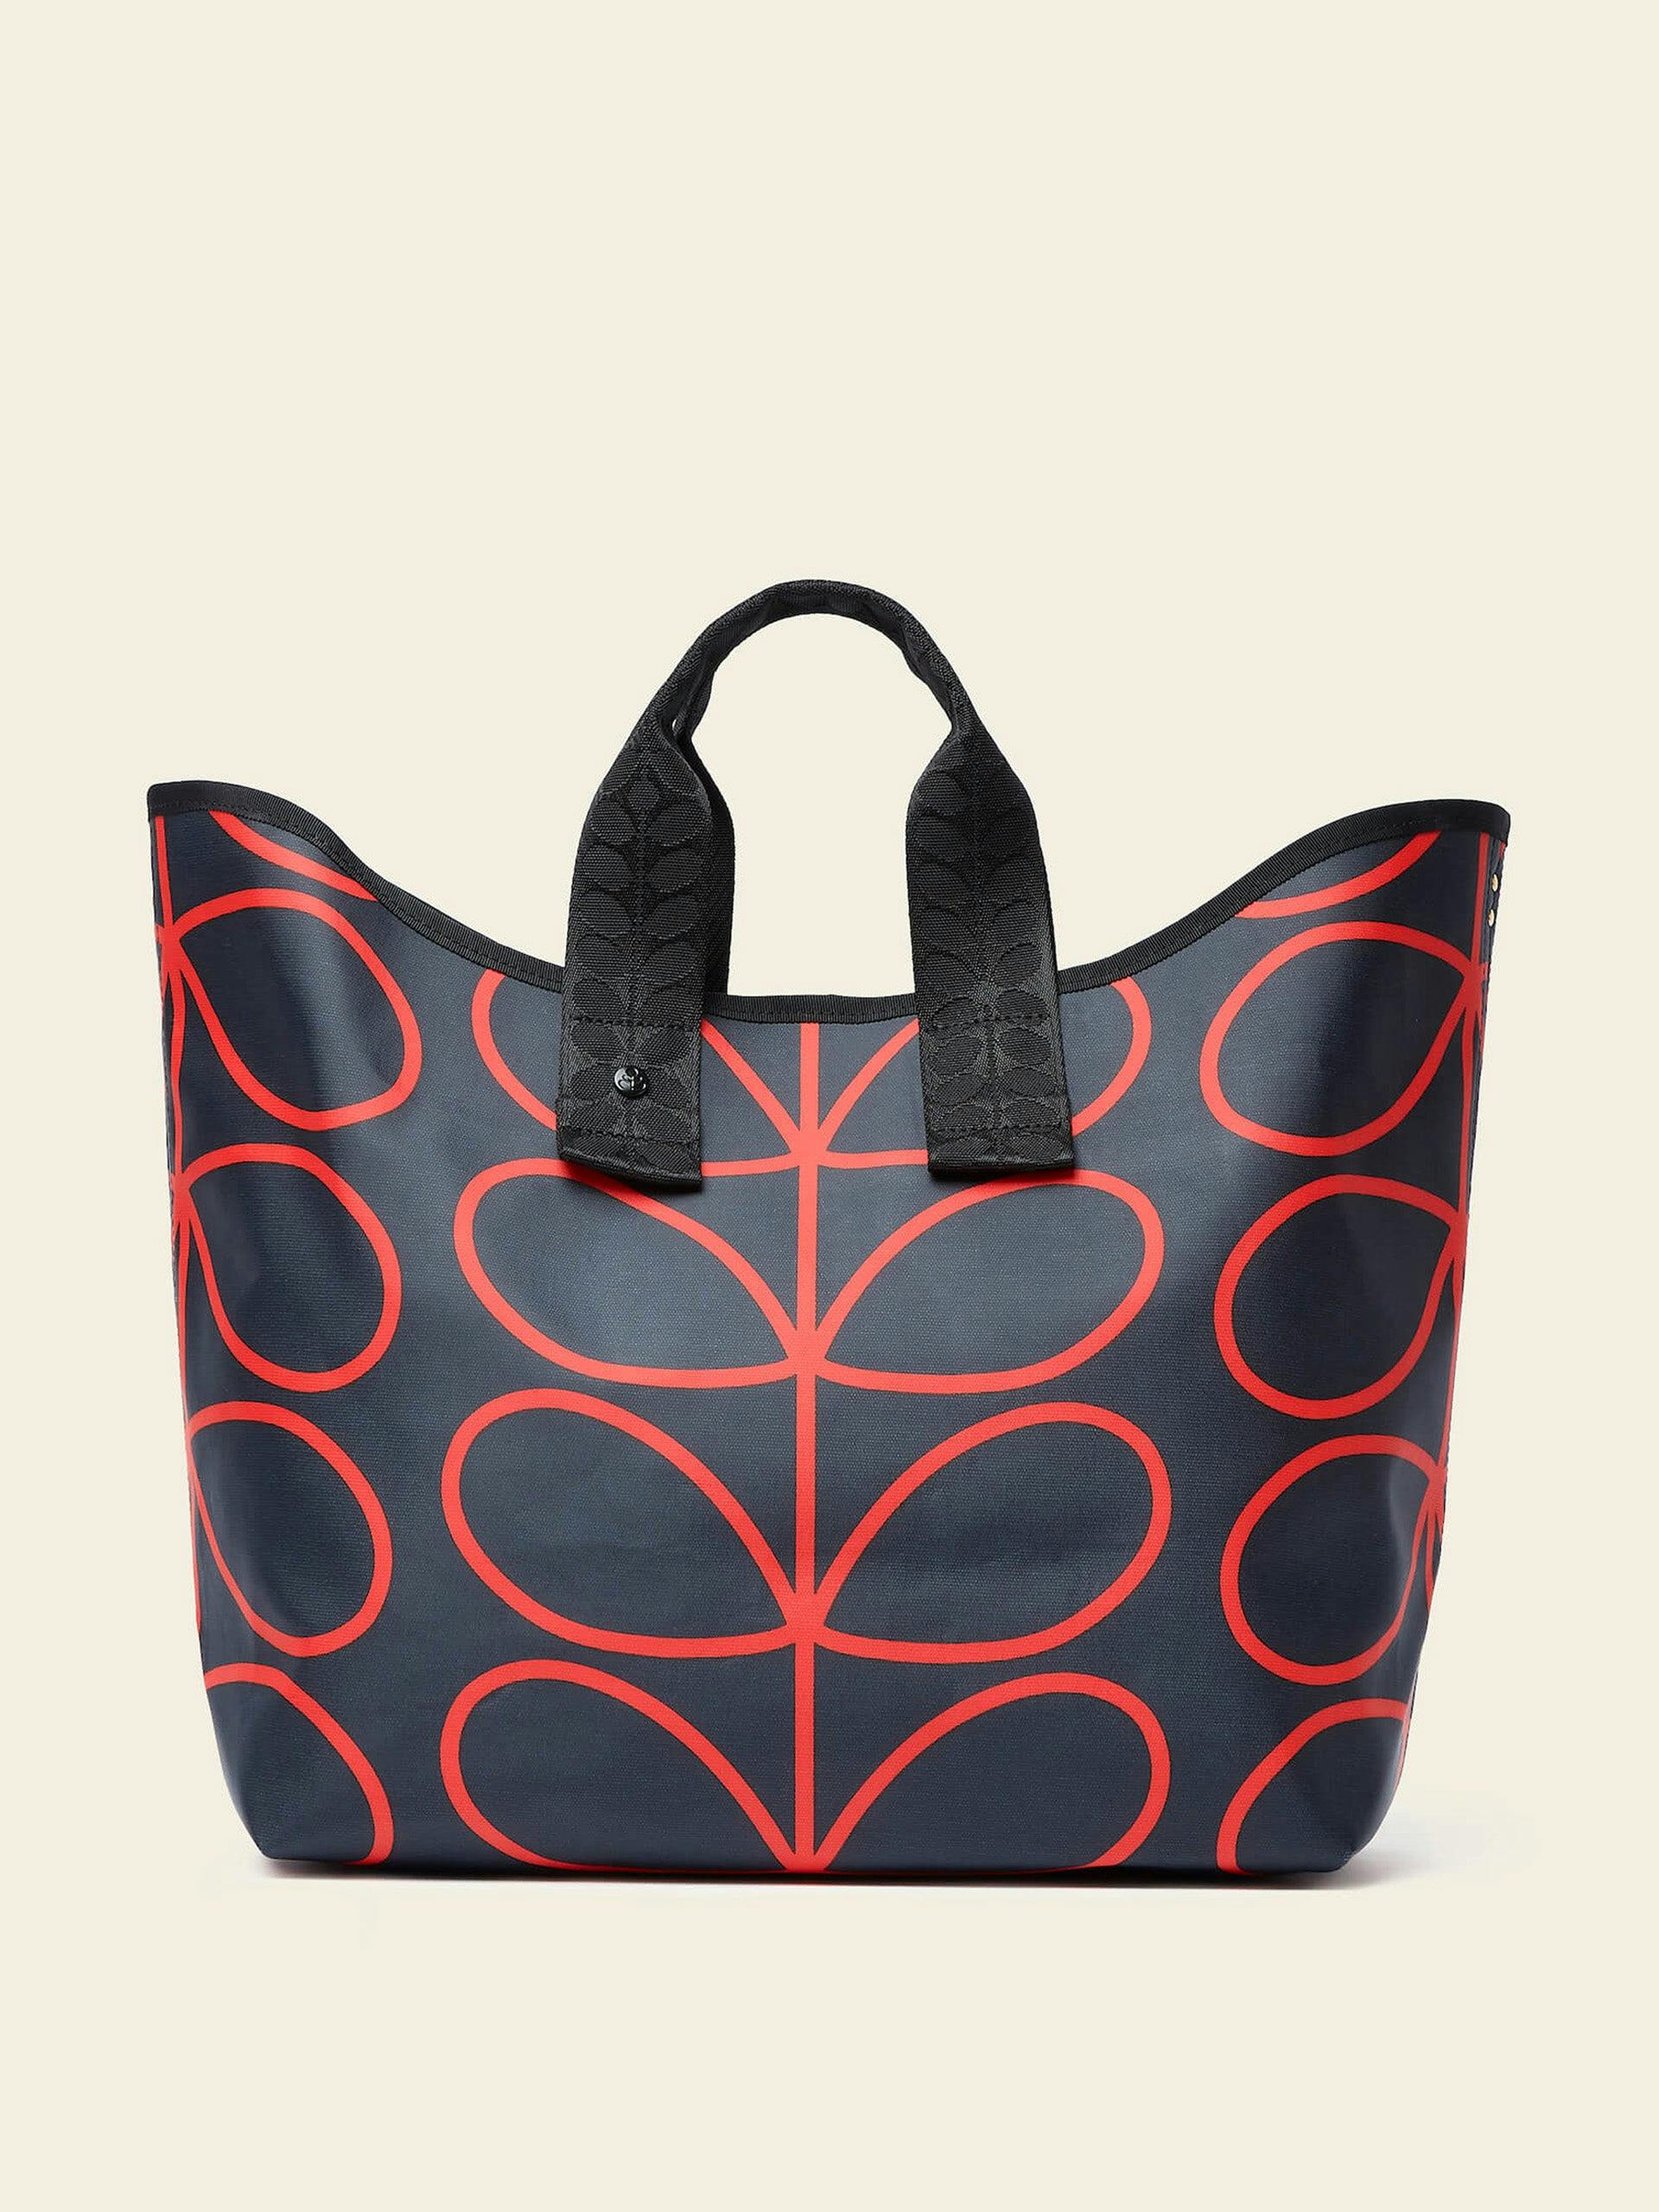 Carryall large tote in Linear Stem Navy